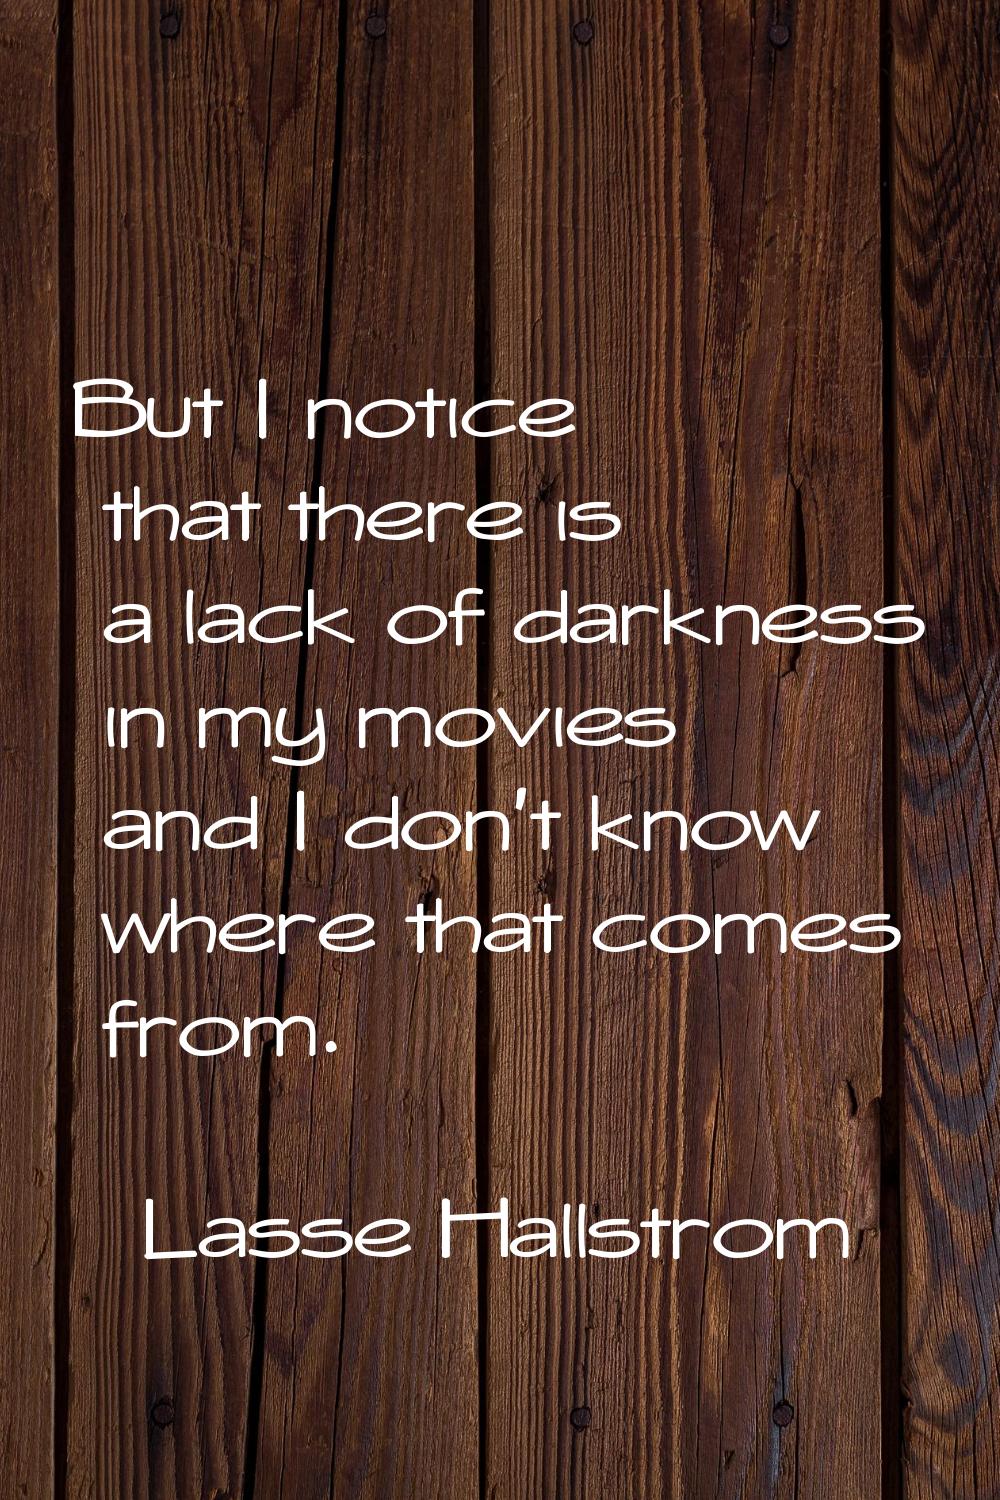 But I notice that there is a lack of darkness in my movies and I don't know where that comes from.